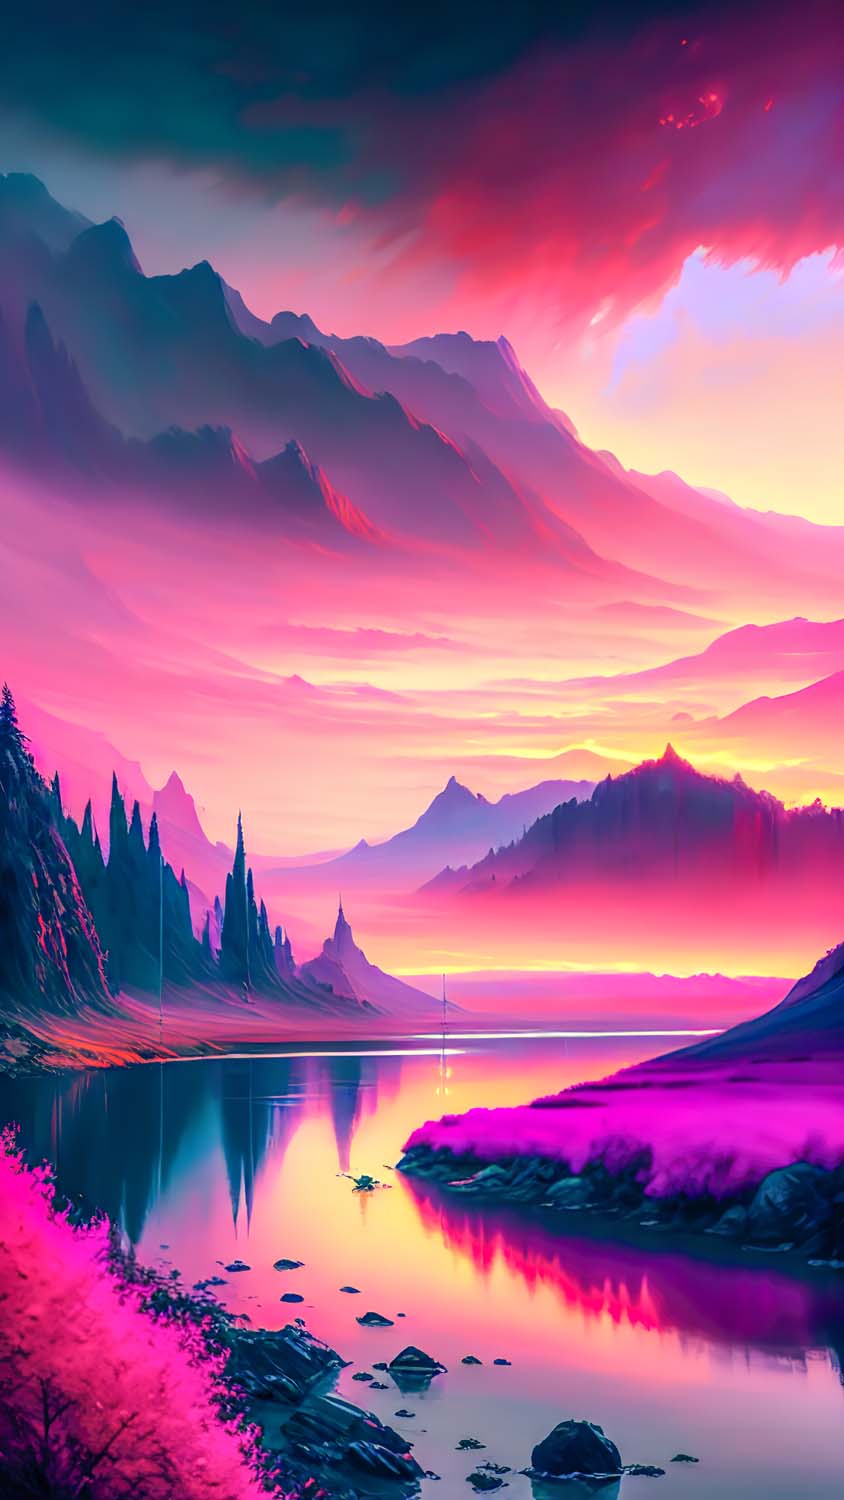 A beautiful pink and purple landscape with mountains and a lake - Landscape